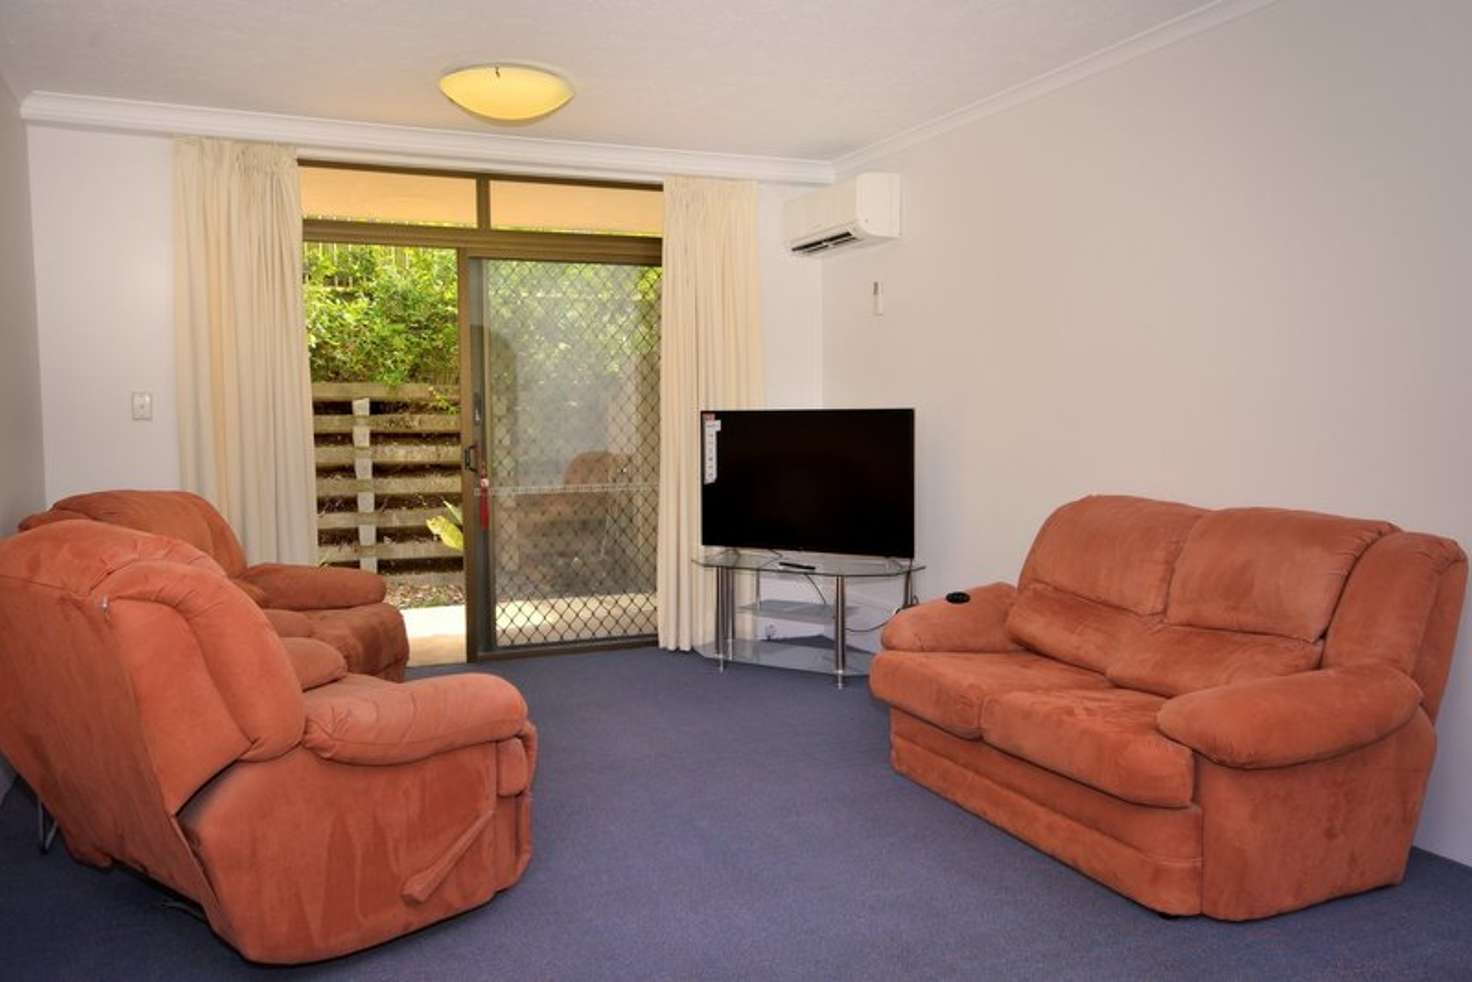 Main view of Homely apartment listing, 4/24 Underhill Av, Indooroopilly QLD 4068